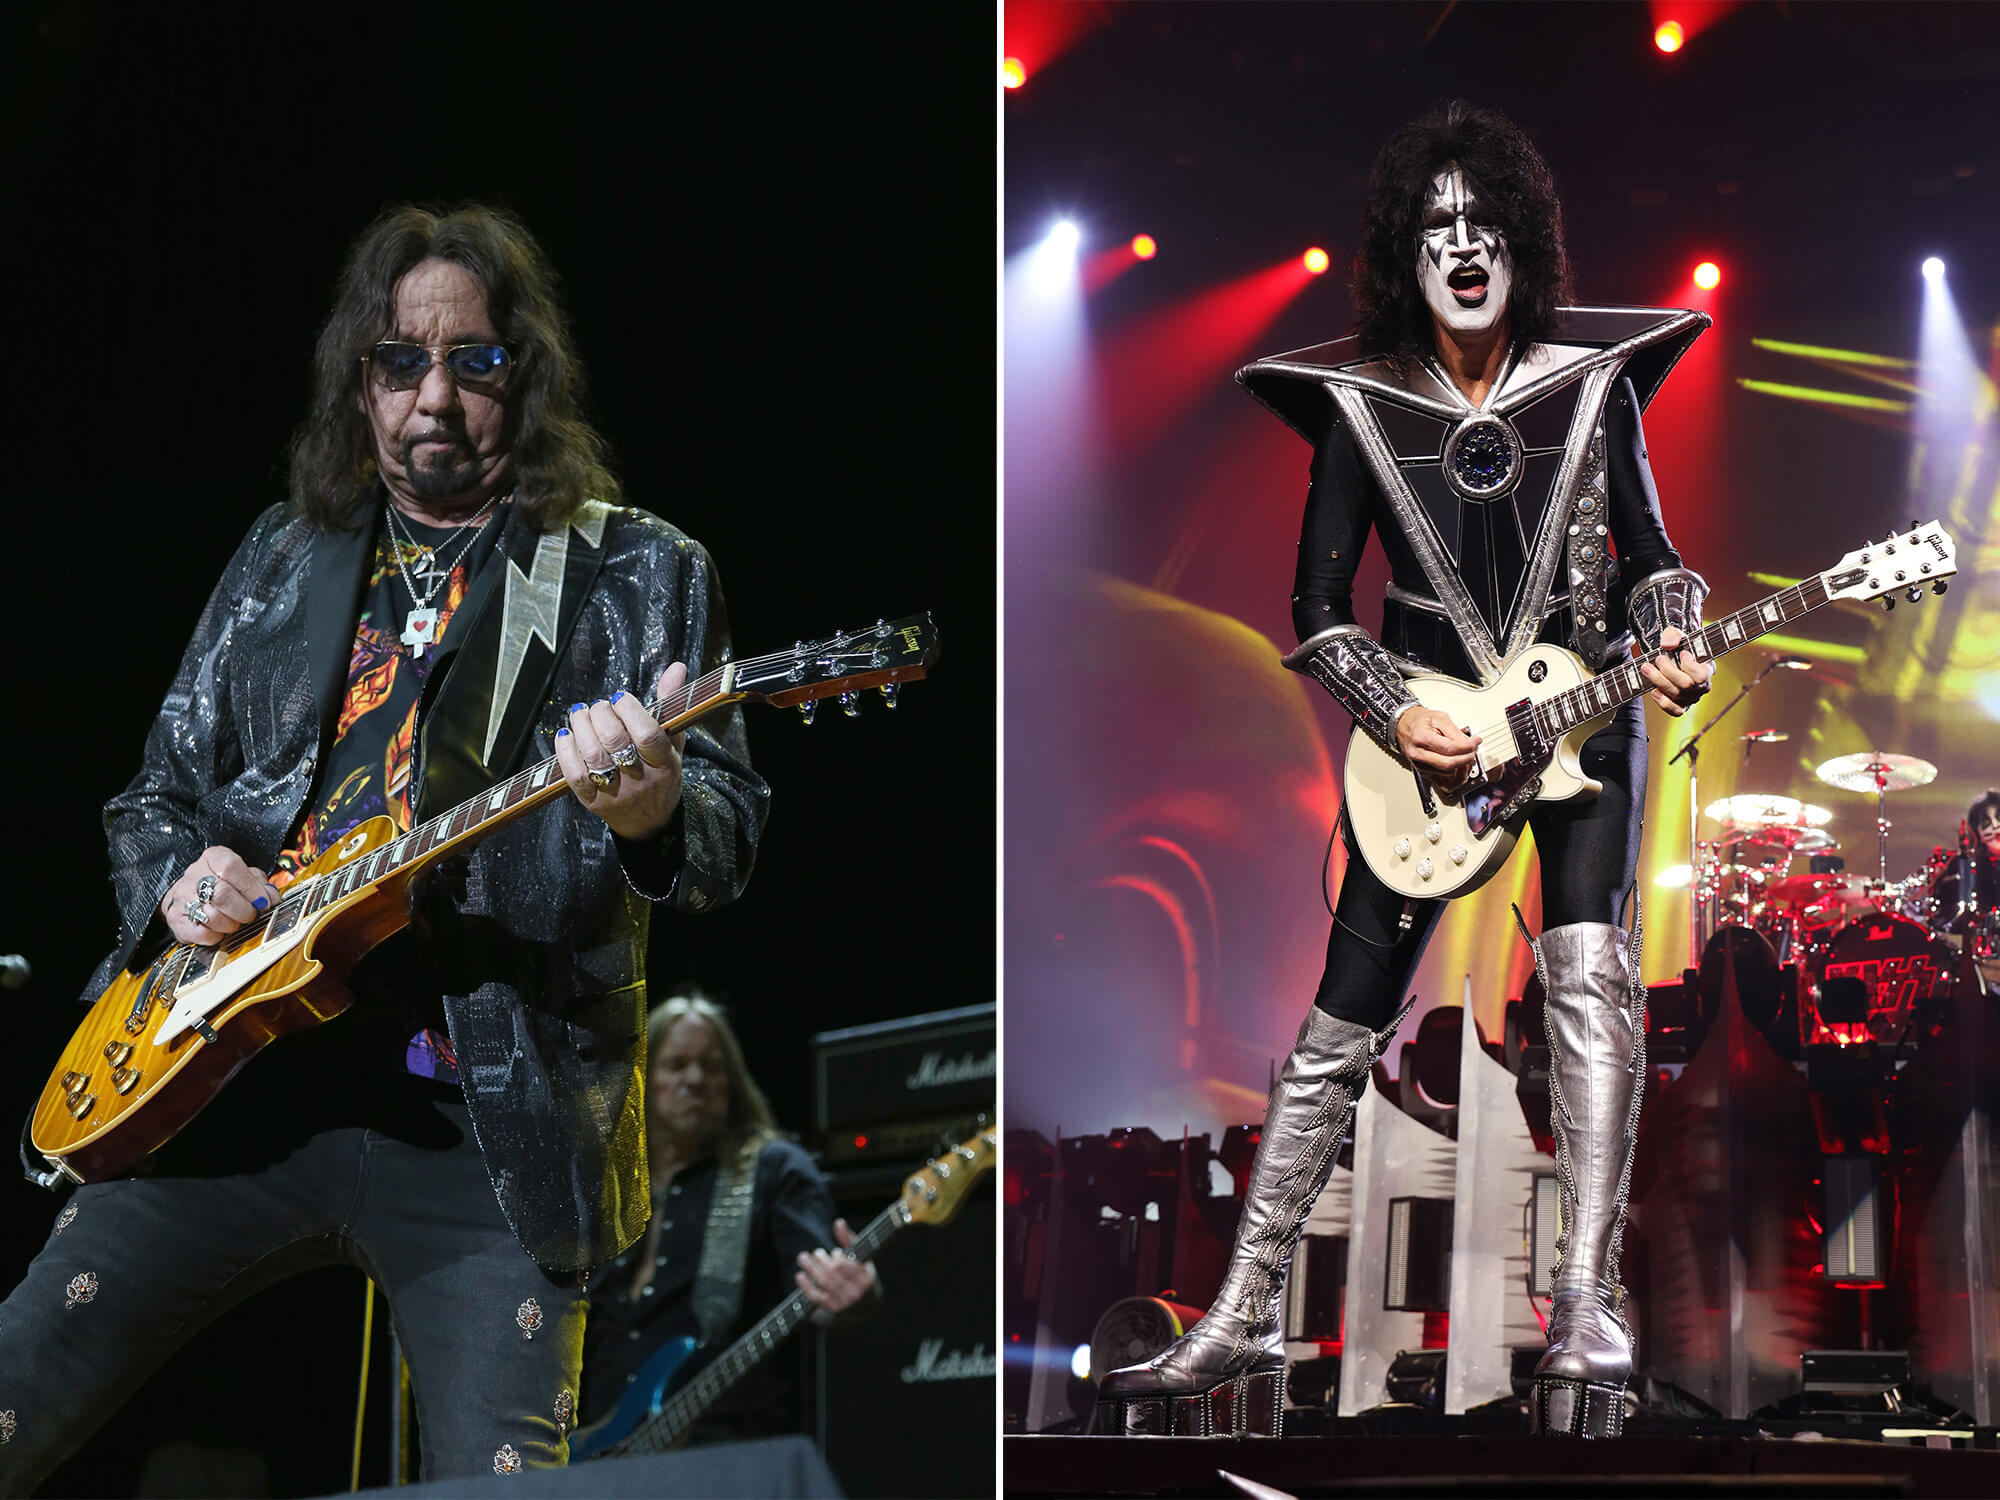 Ace Frehley (left) and Tommy Thayer (right). Both guitarists are on stage, and Thayer is wearing the spaceman makeup previously worn by Frehley.